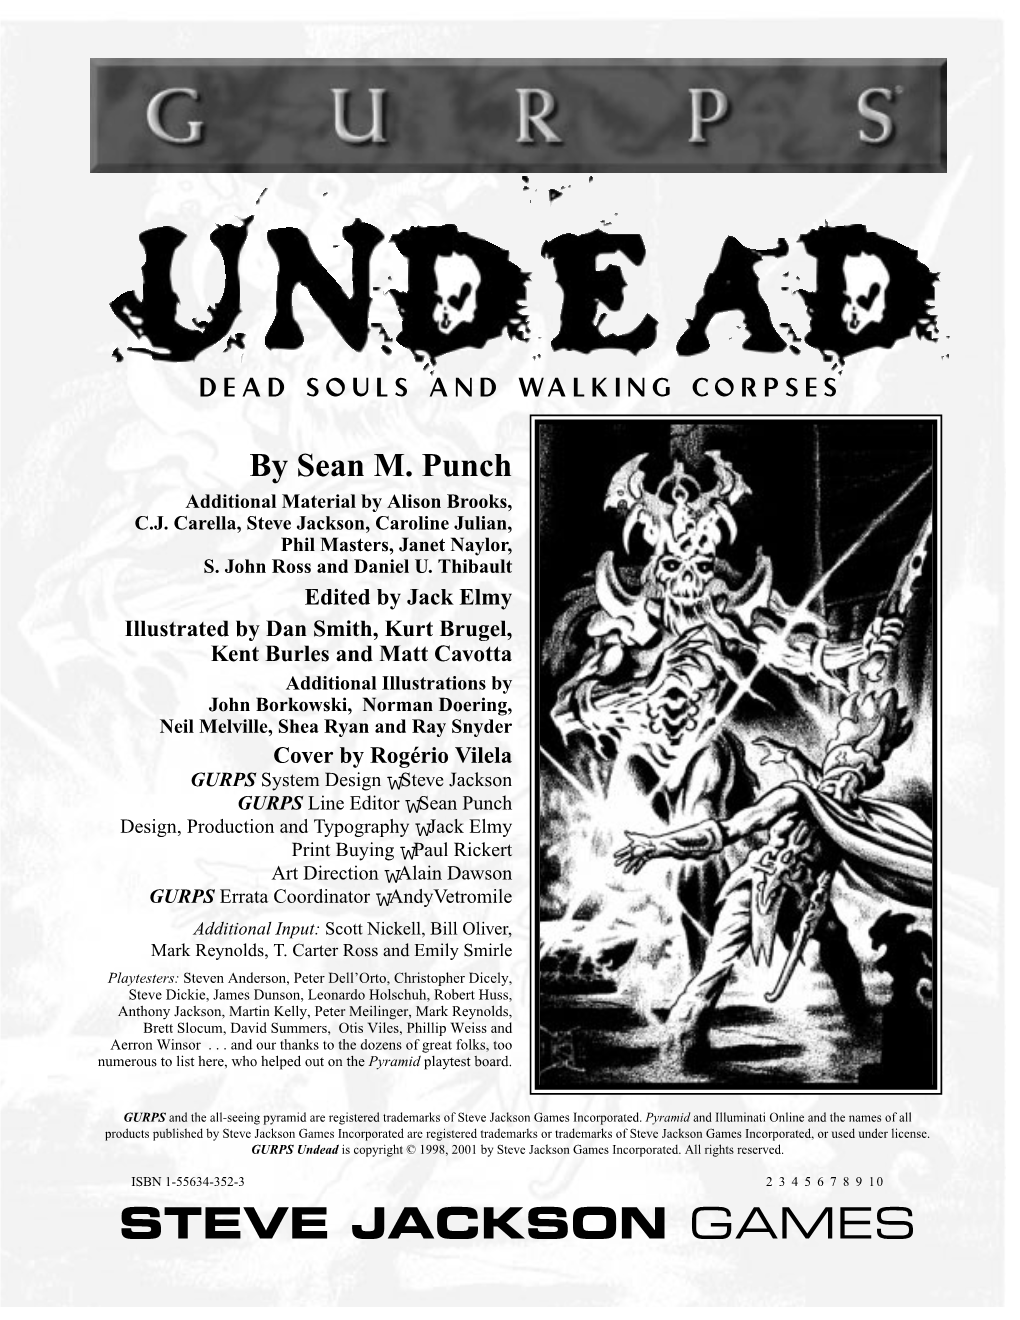 GURPS Undead Is Copyright © 1998, 2001 by Steve Jackson Games Incorporated